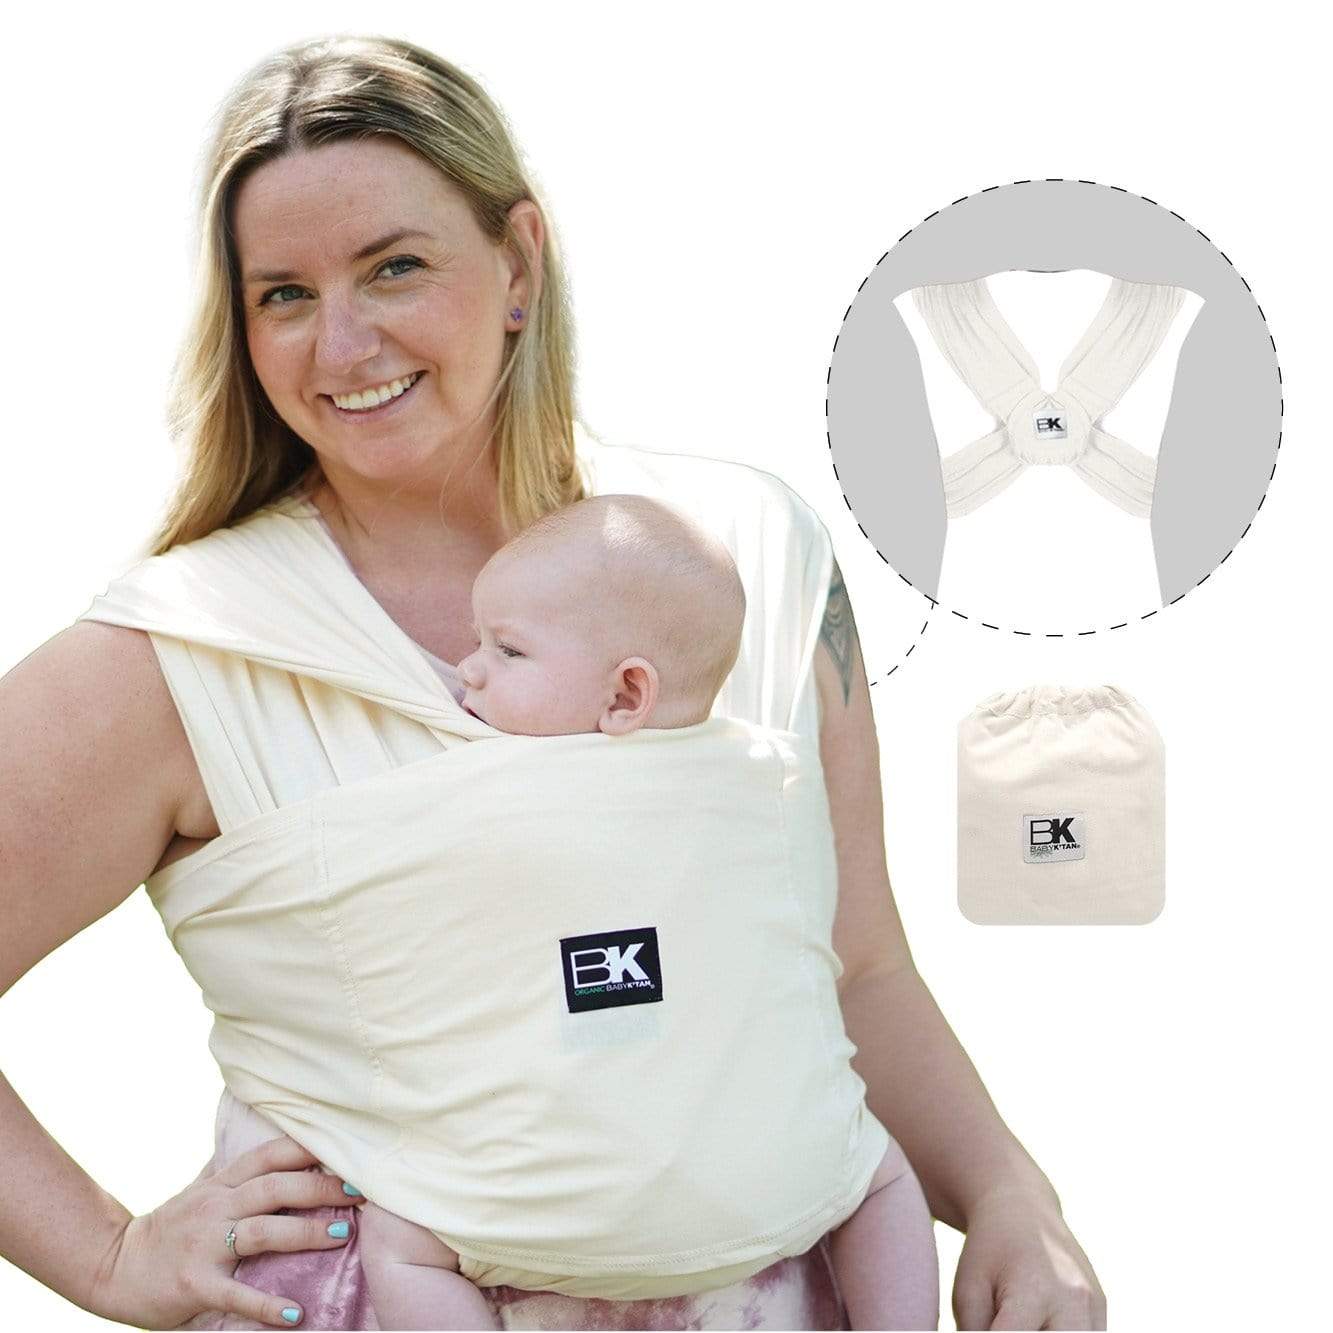 Original Baby K'tan Baby Carrier: #1 Easy Pre-Wrapped, Soft, Slip-On, No  Rings, No Buckles | 5 in 1 Baby Sling Gift | The Best Hands Free Infant  Wrap